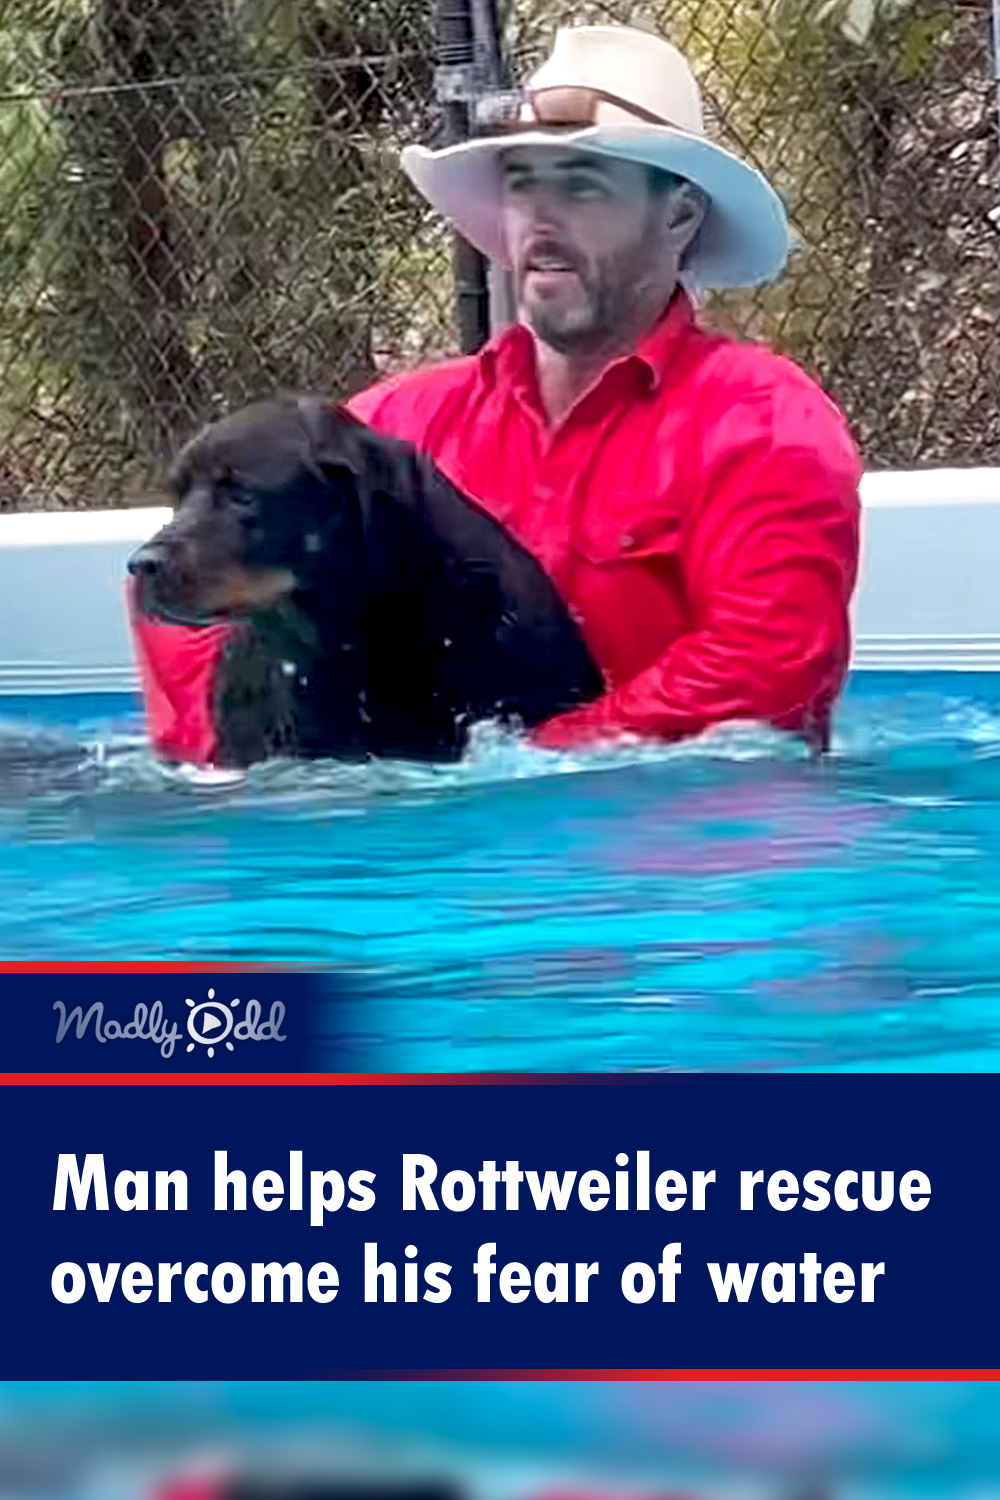 Man helps Rottweiler rescue overcome his fear of water